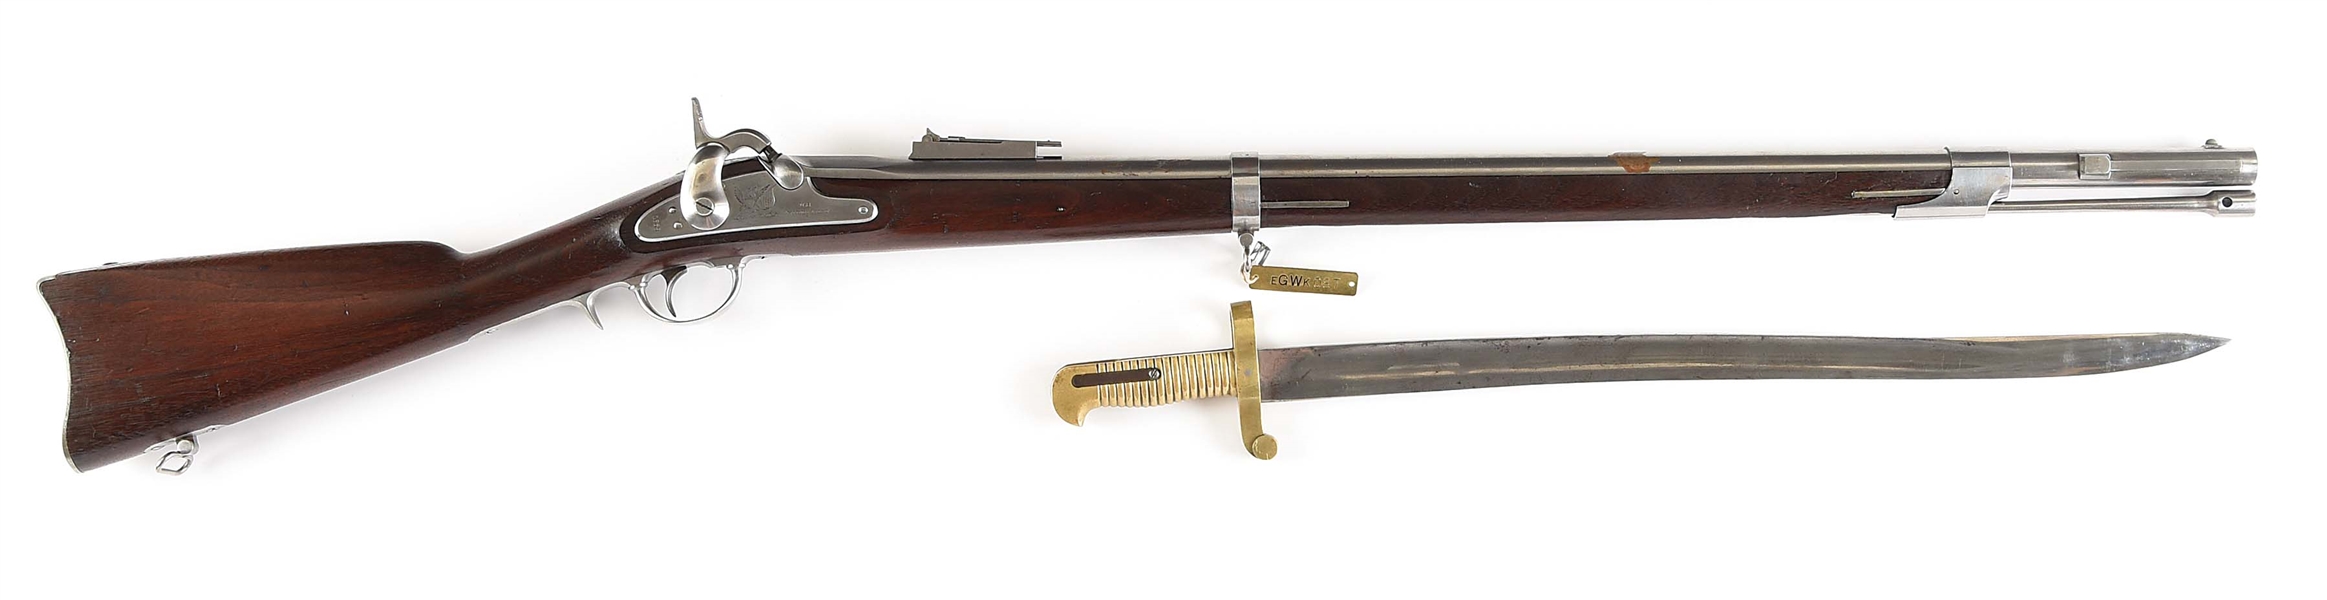 (A) CIVIL WAR WHITNEY MODEL 1861 PLYMOUTH NAVY RIFLE WITH SABER BAYONET.